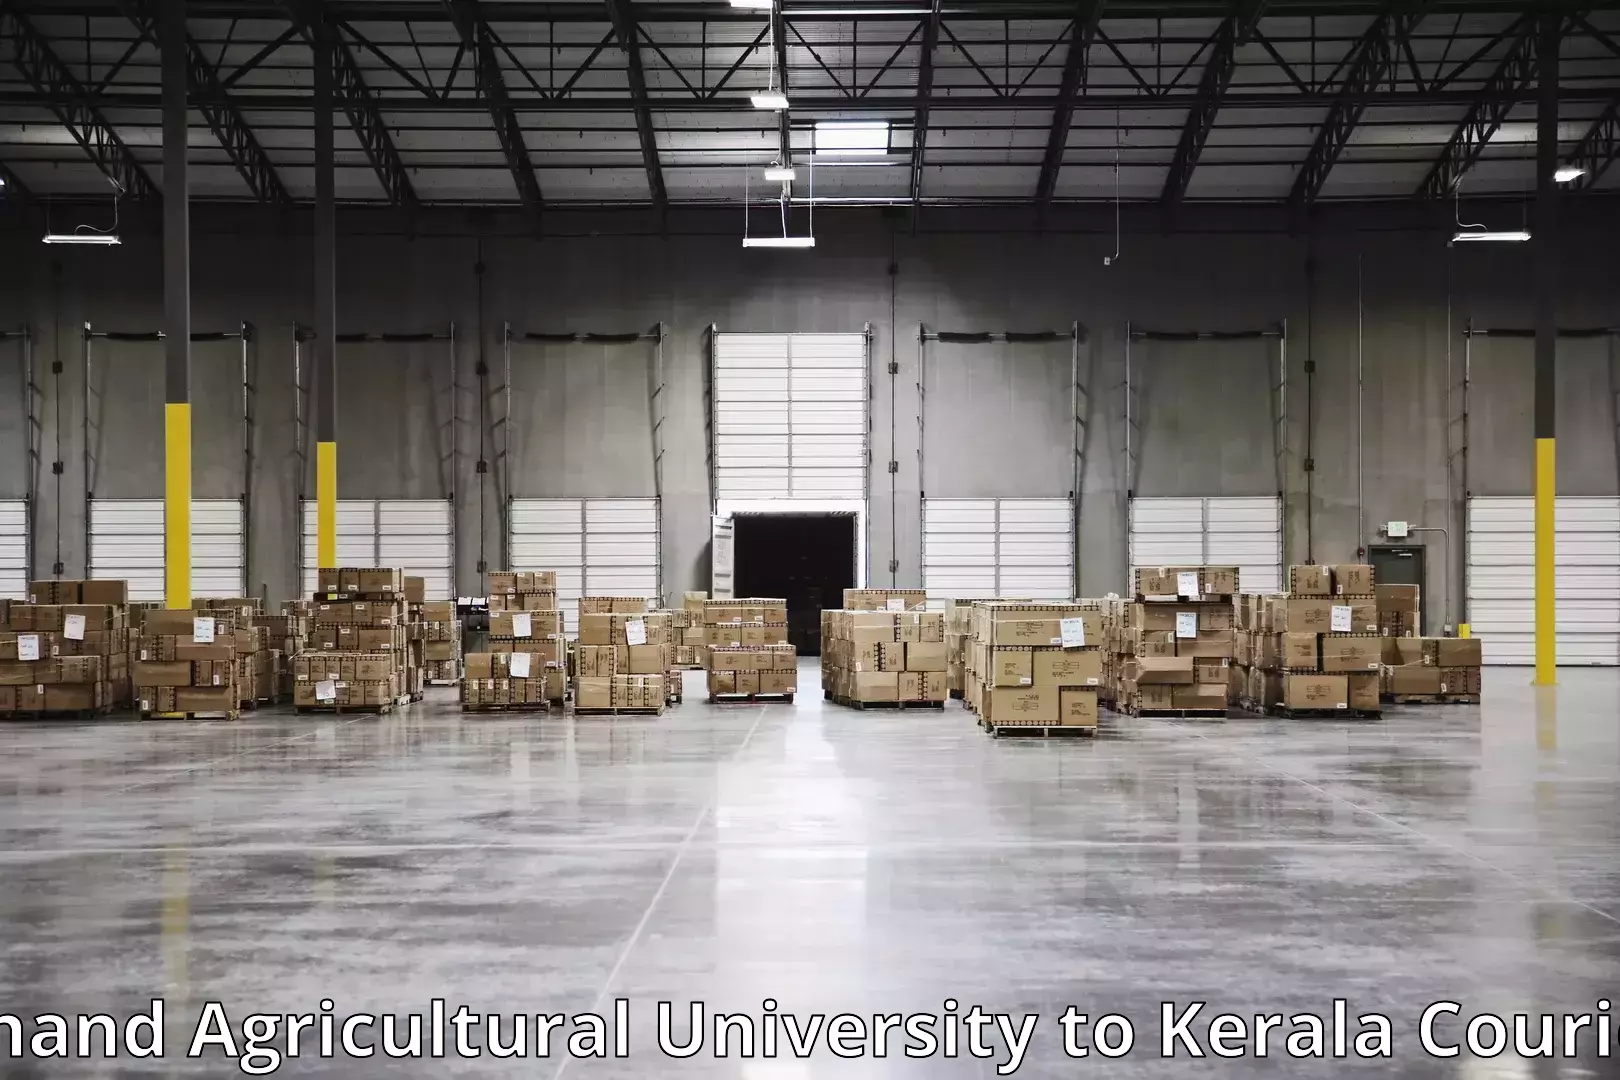 Home goods moving company Anand Agricultural University to Cochin Port Kochi